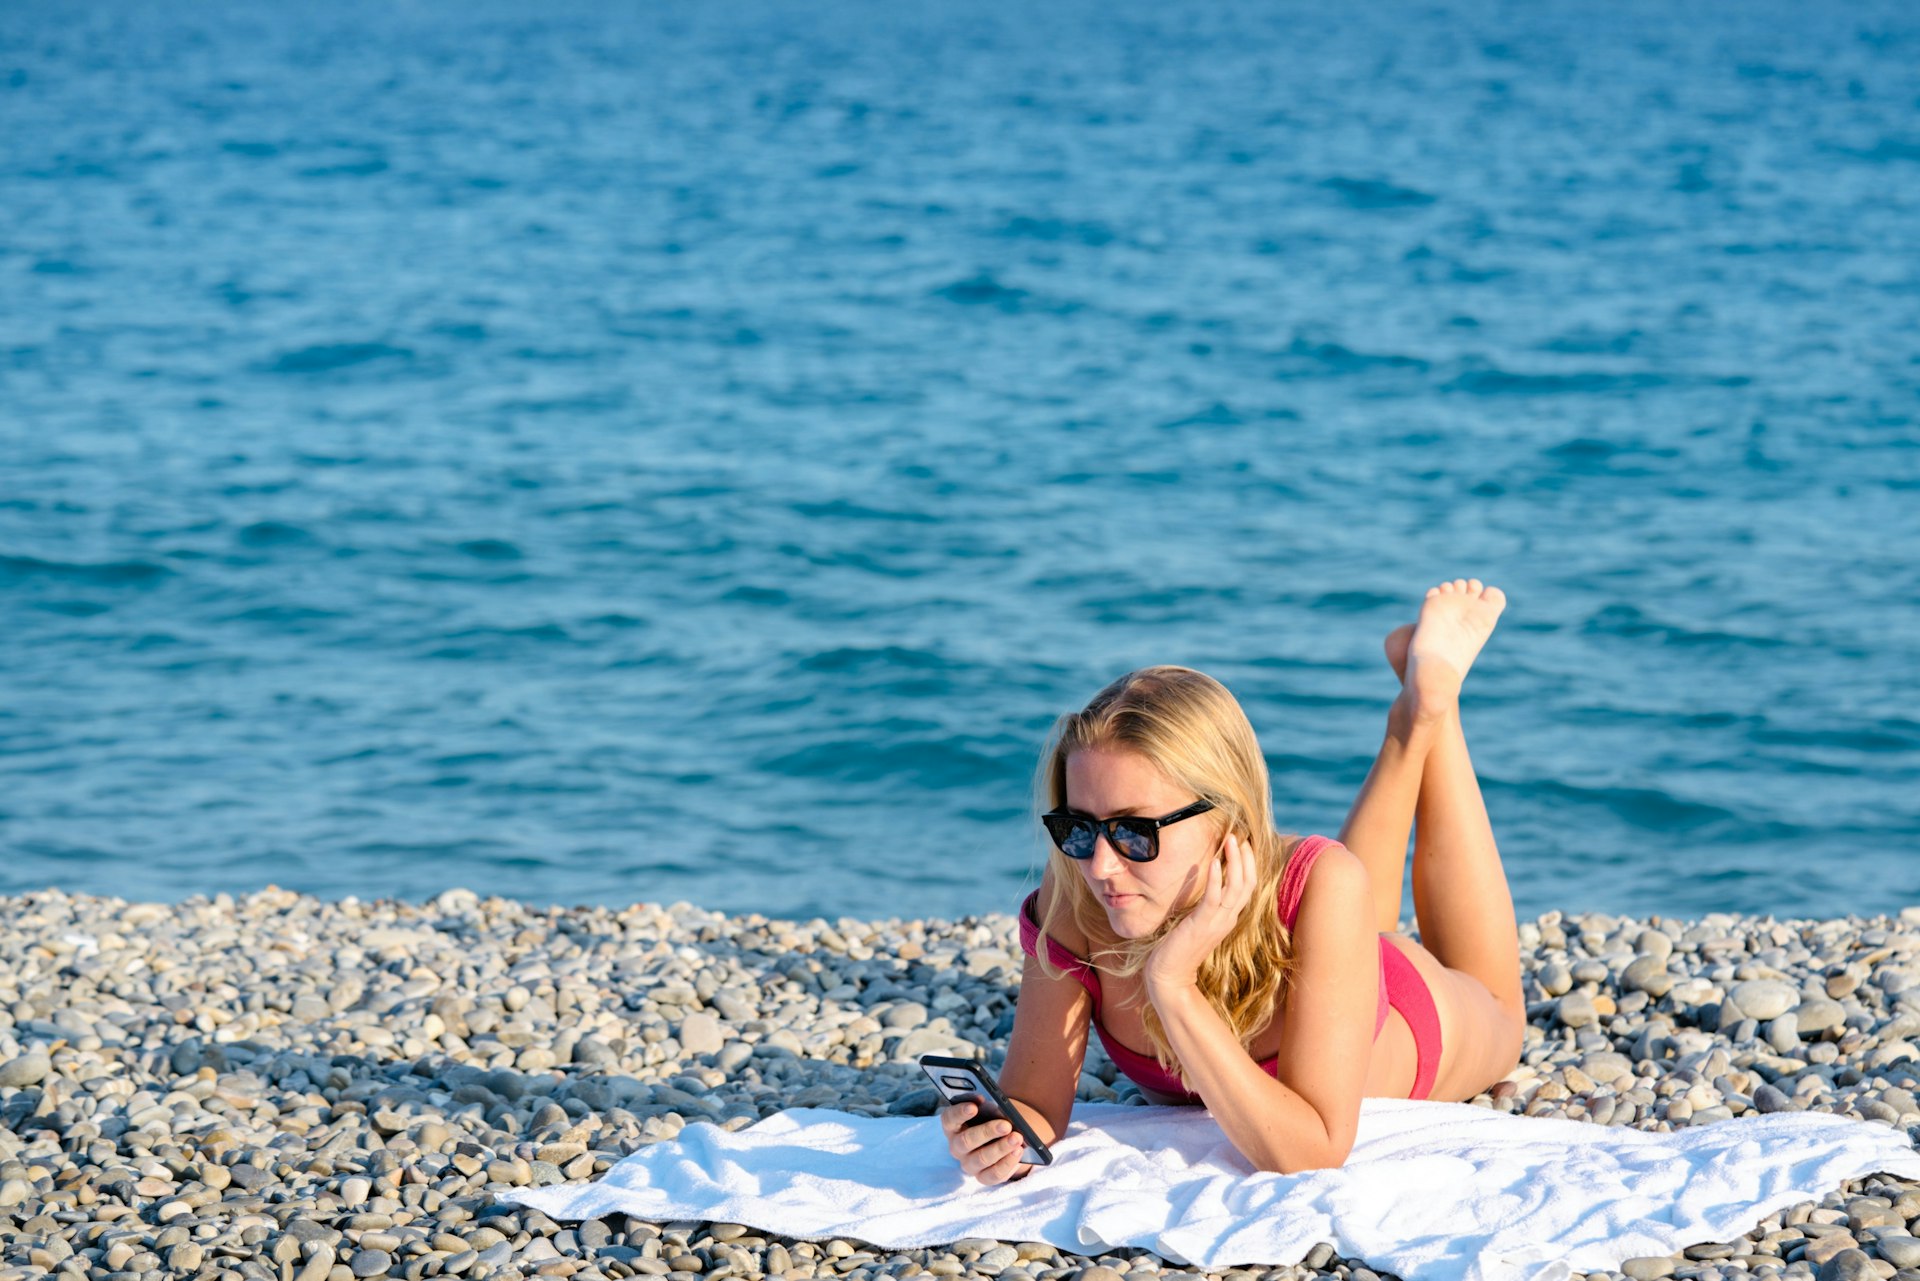 A woman checks her smartphone lying out on a towel on a pebble beach